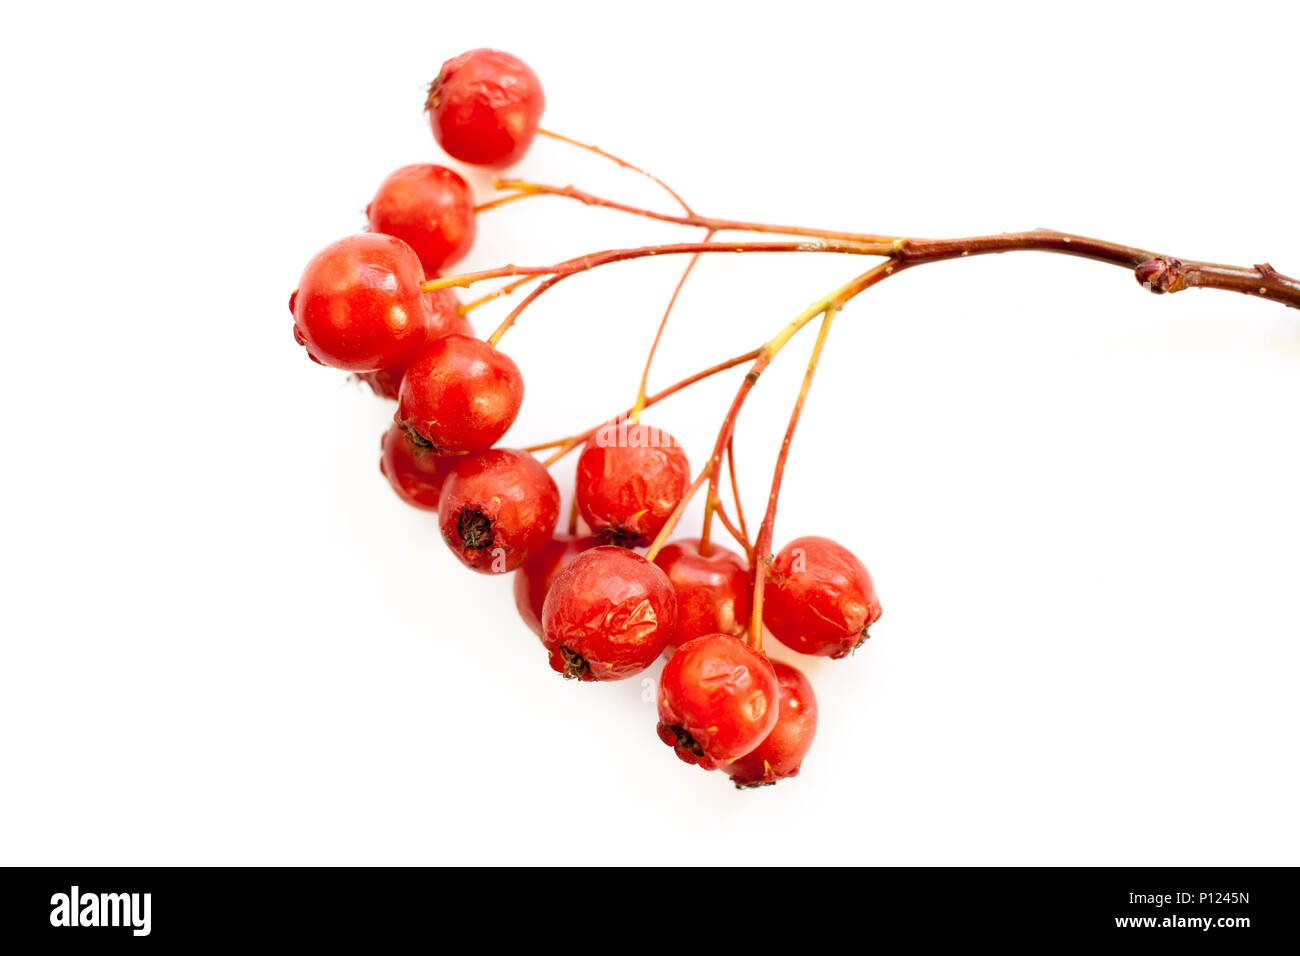 Close-up of bunch of red hawthorn berries on white background. Stock Photo